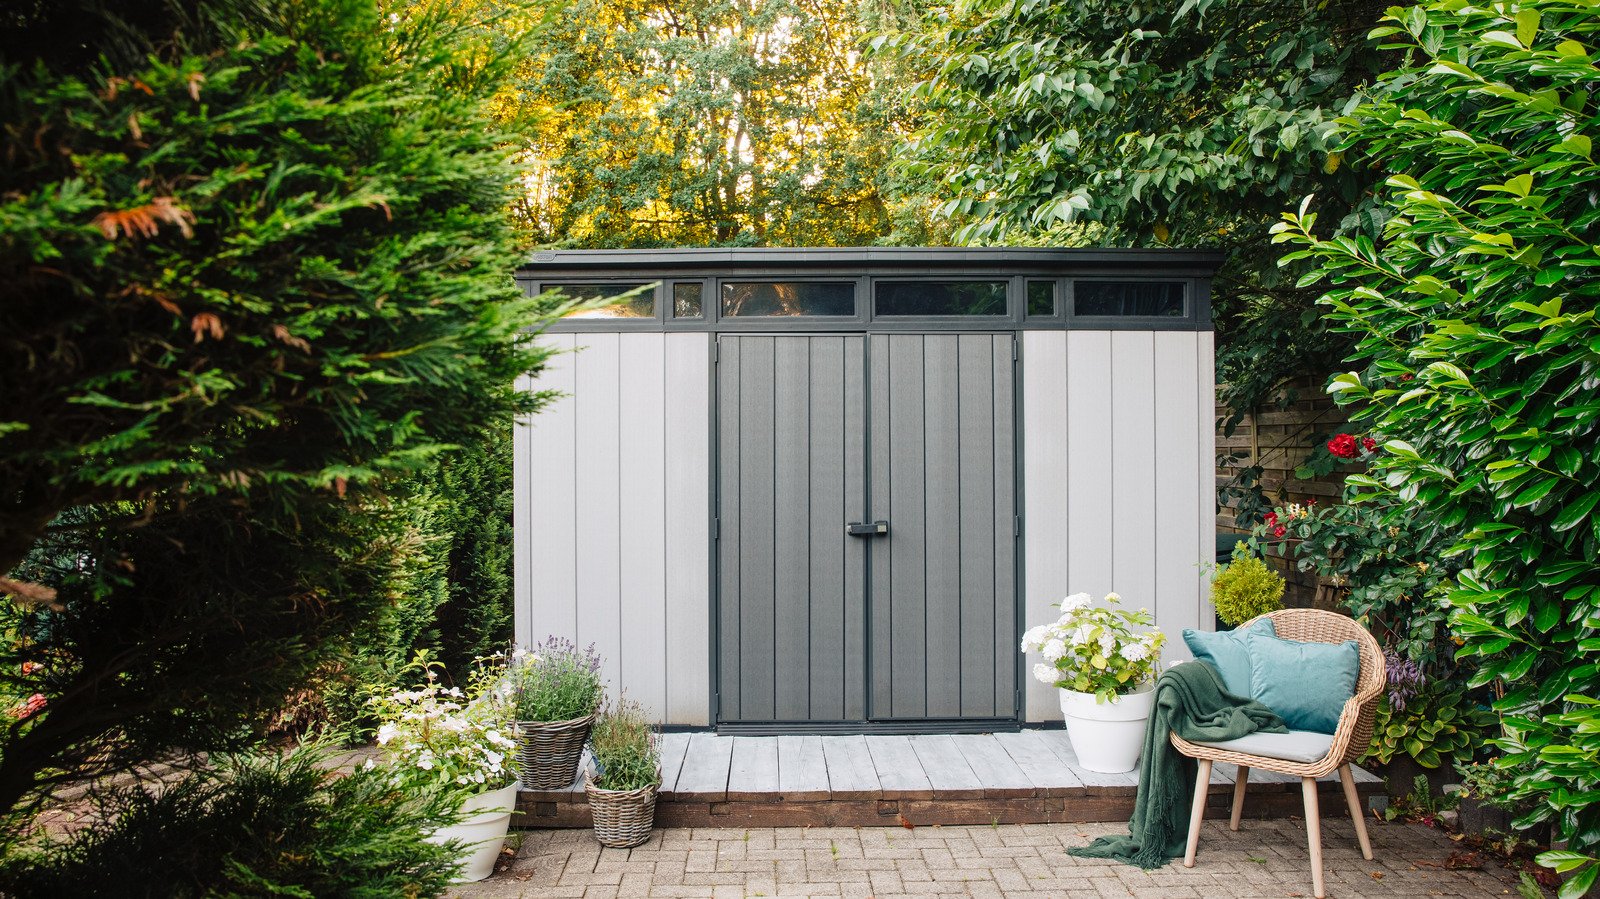 15 Tips To Build Your Own DIY Shed